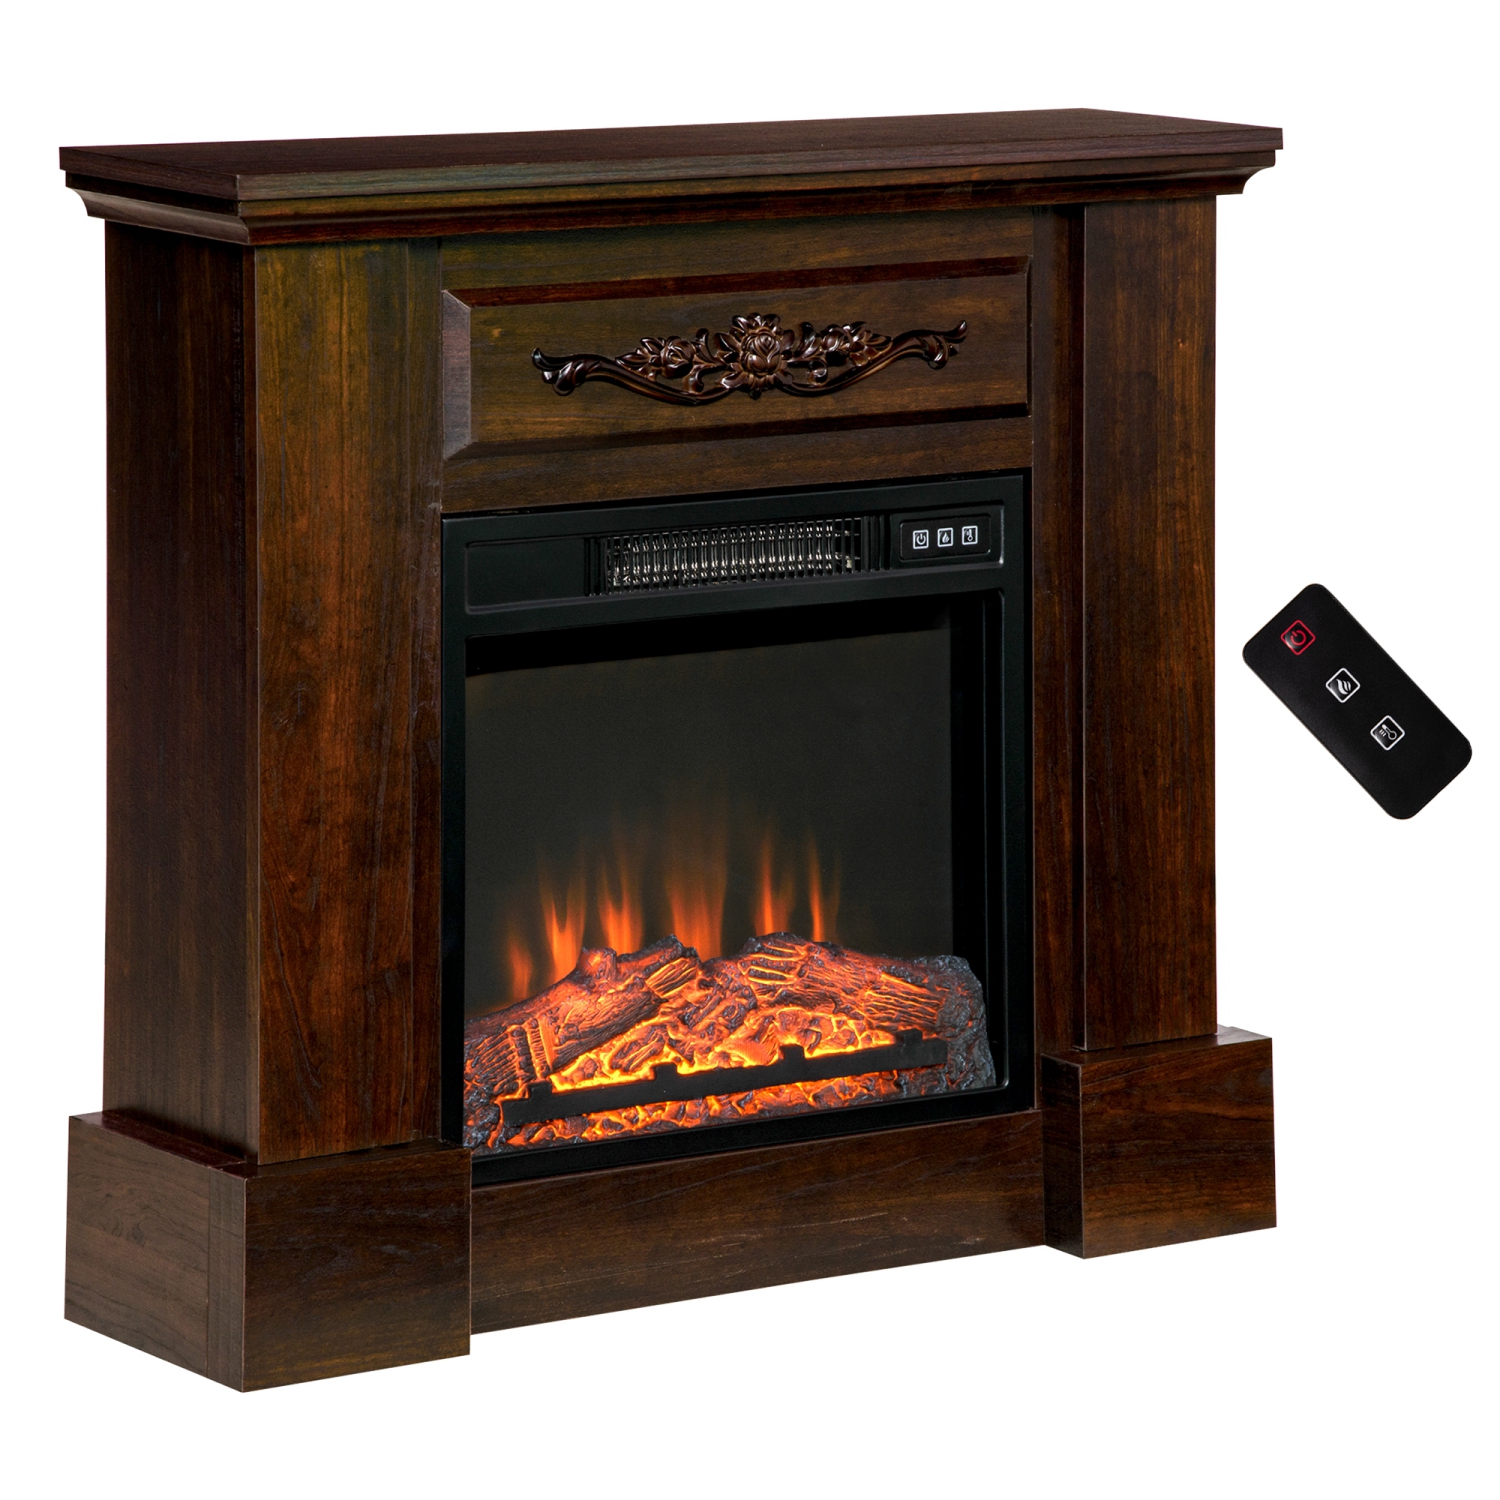 HOMCOM 32" Electric Fireplace Heater with Mantel, Freestanding Fireplace Stove with Log Hearth, Adjustable Realistic Flame and Remote Control, 1400W, Brown